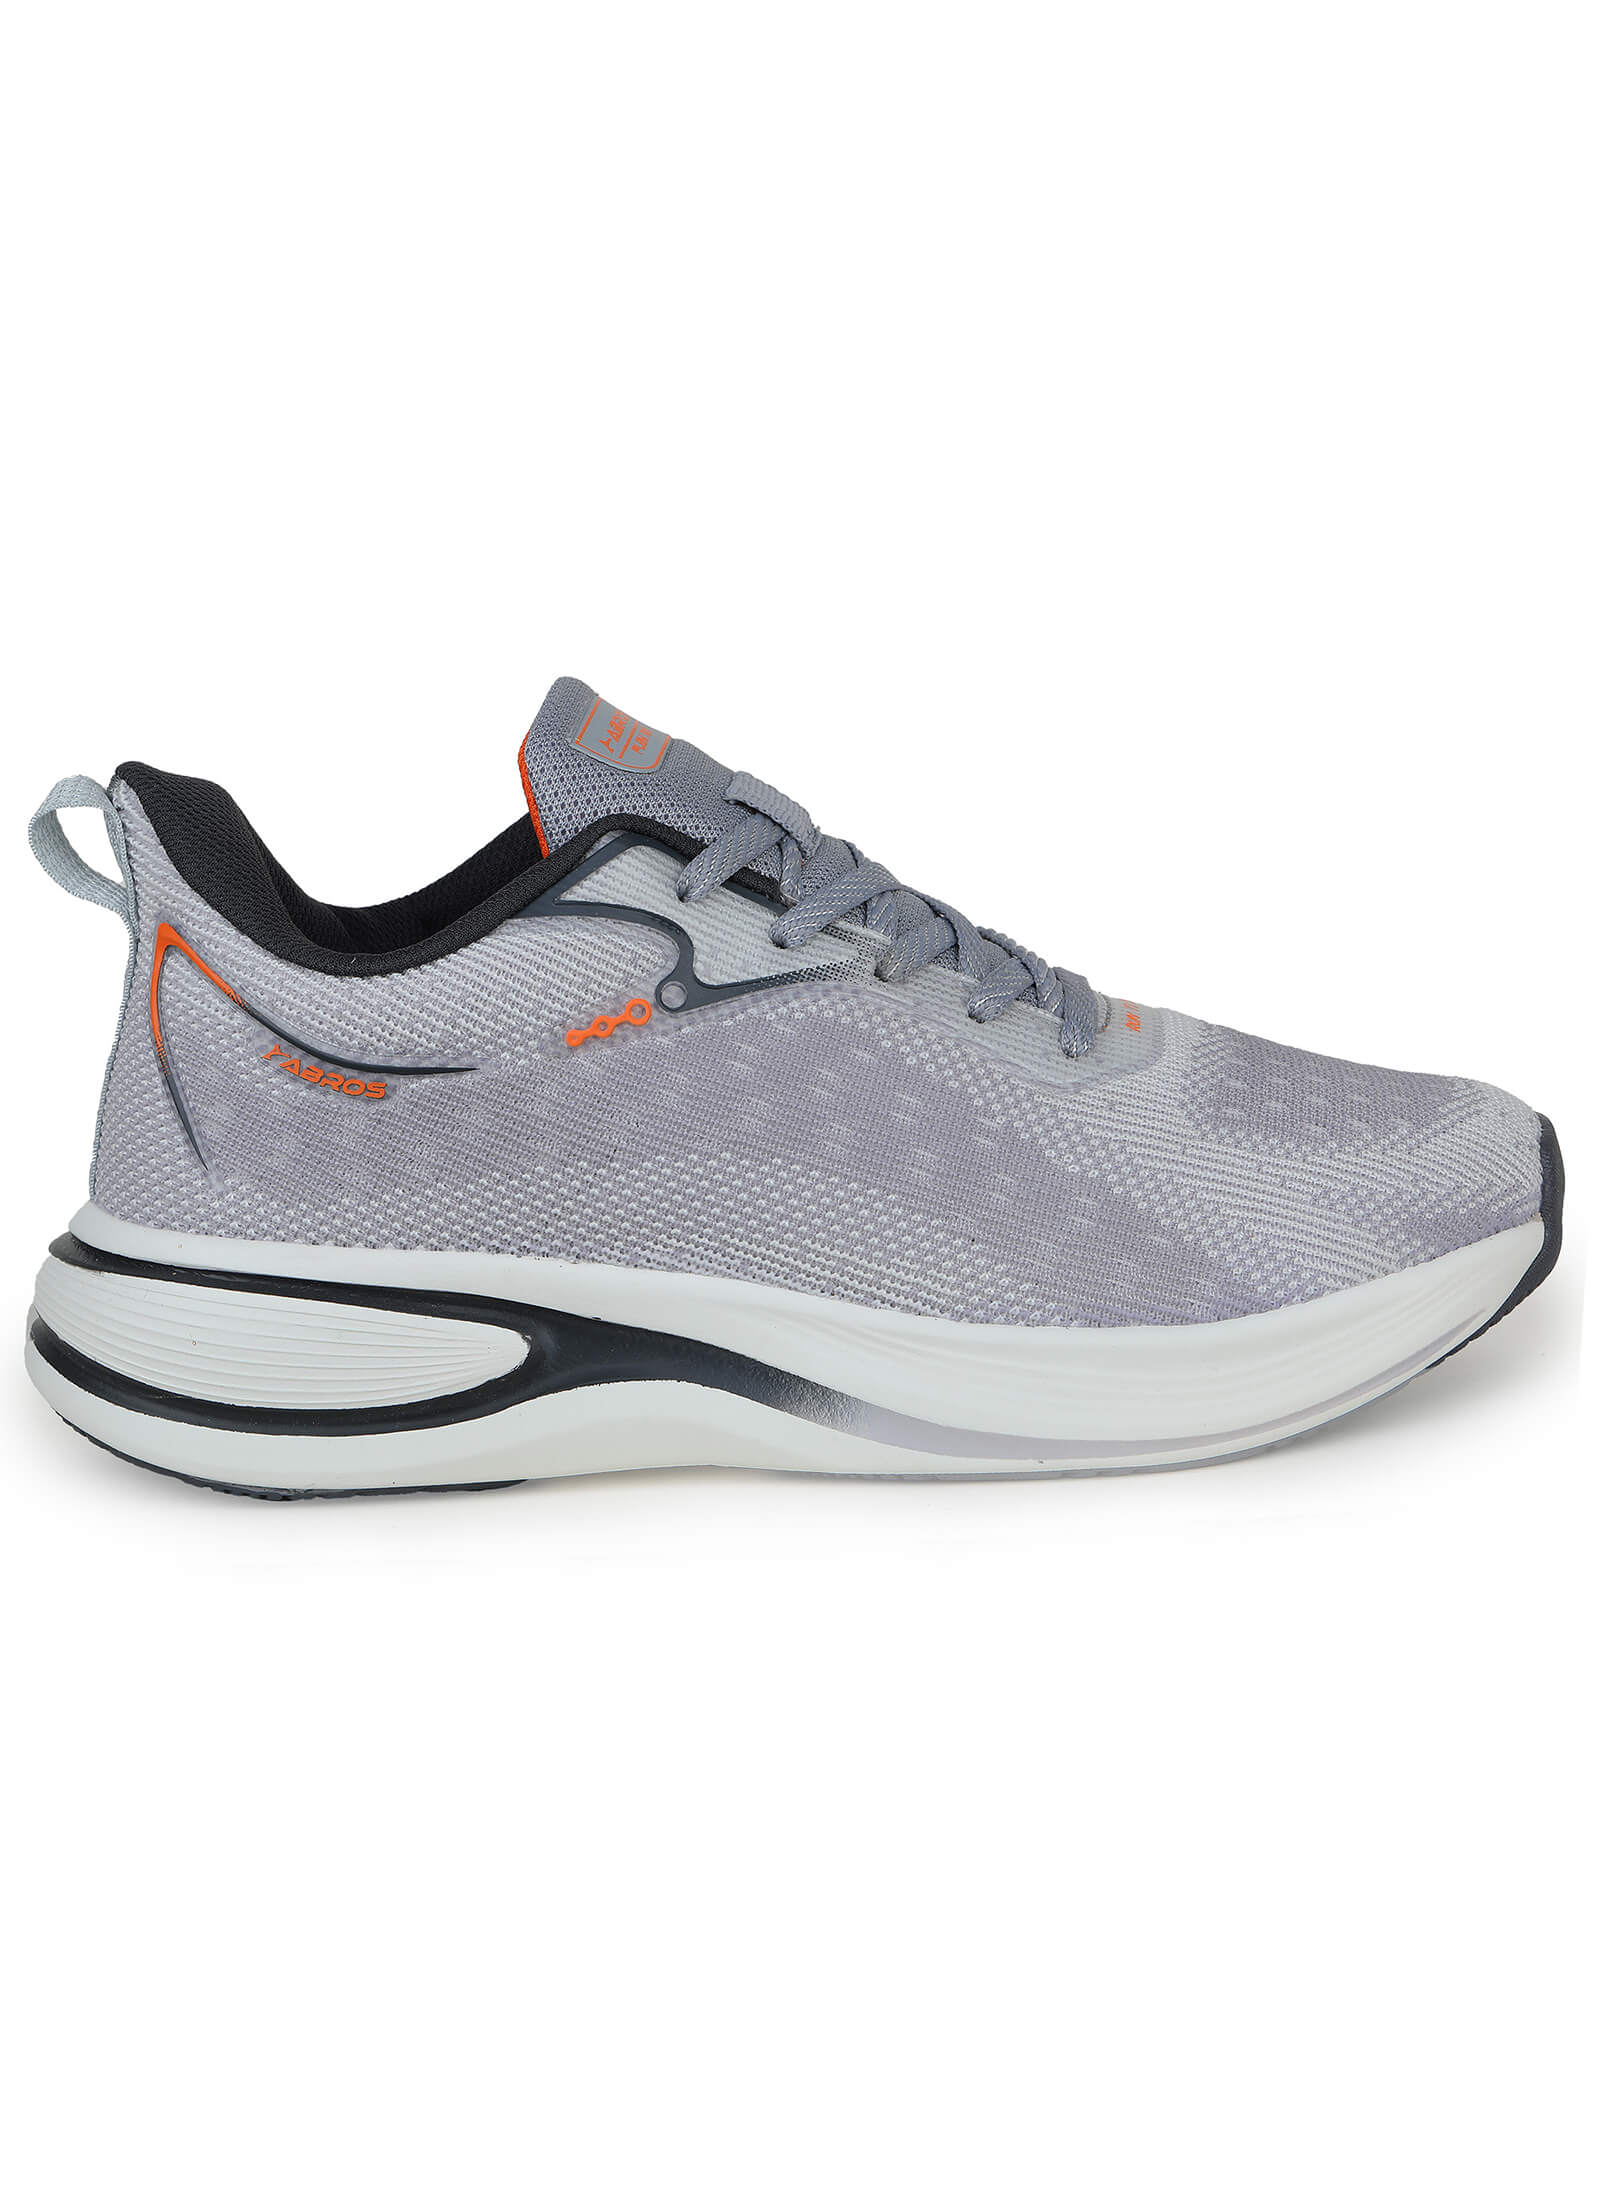 Steady Sports Shoes For Men